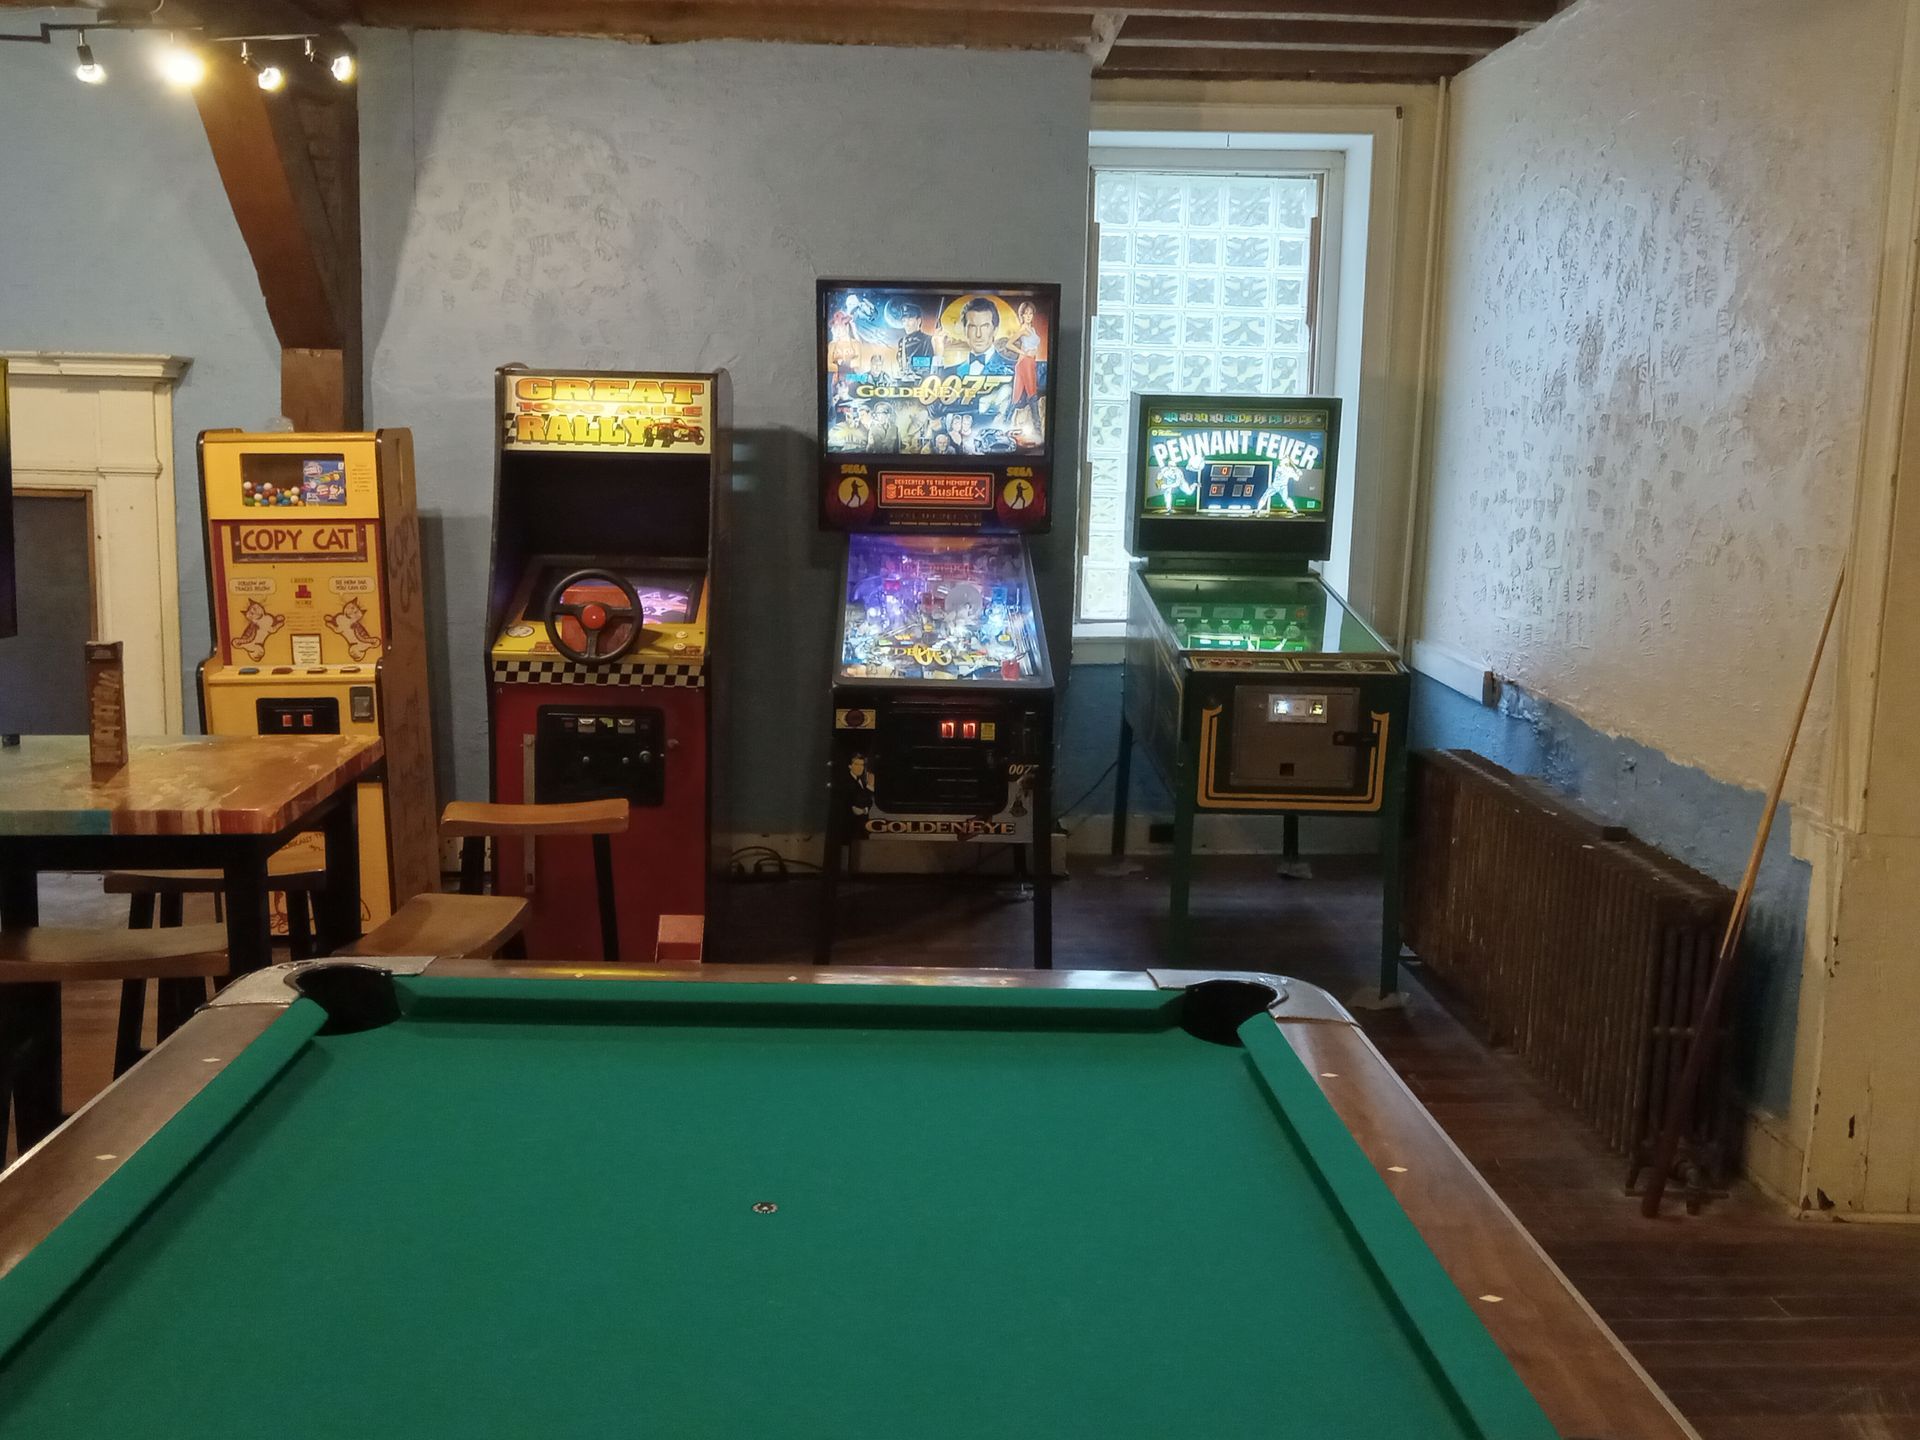 A pool table in a room with pinball machines